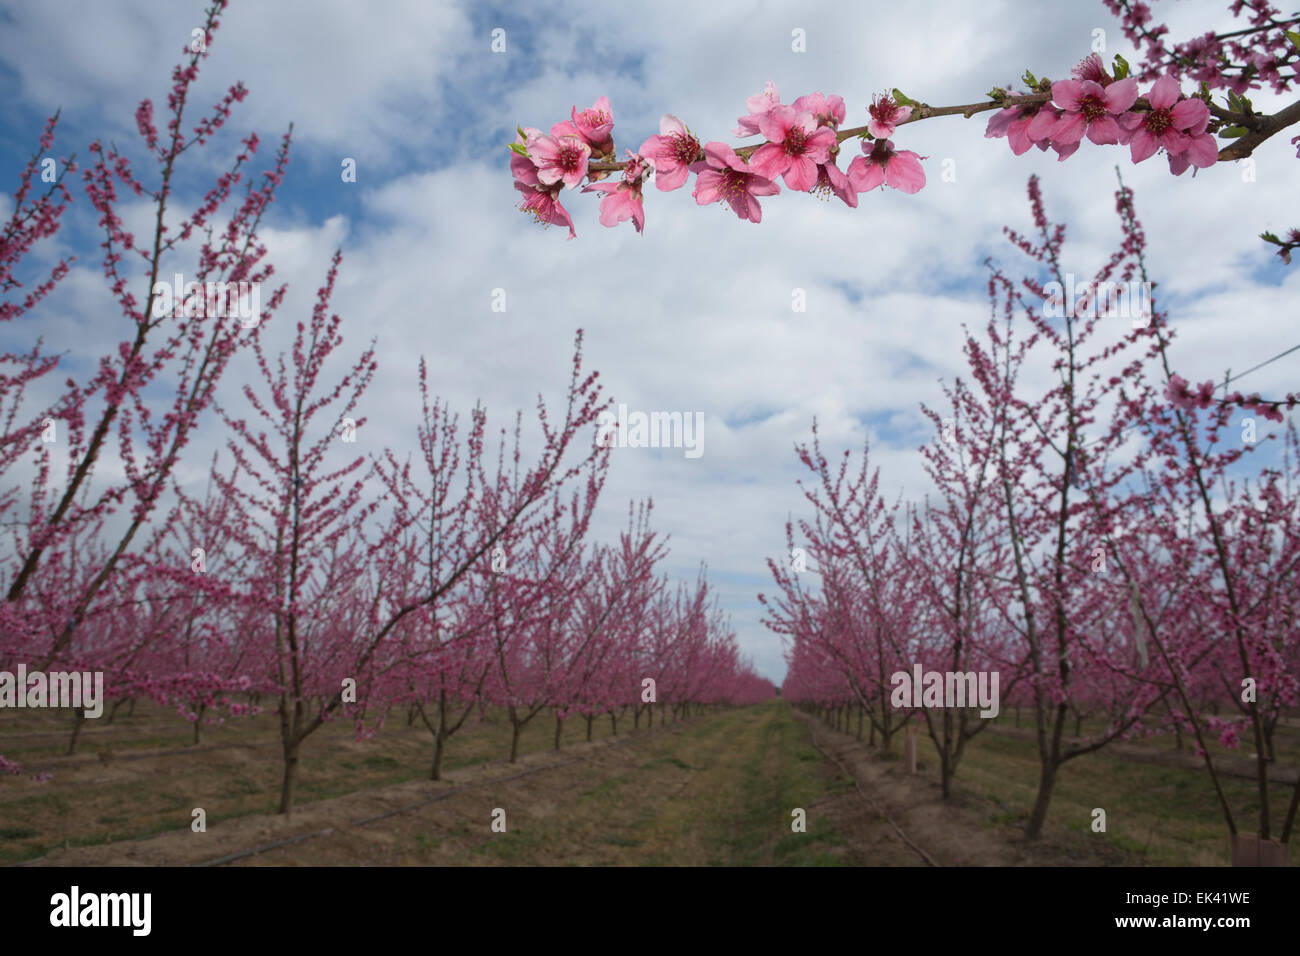 Blossoming tree in field on background of cloudy sky, Badajoz, Spain Stock Photo